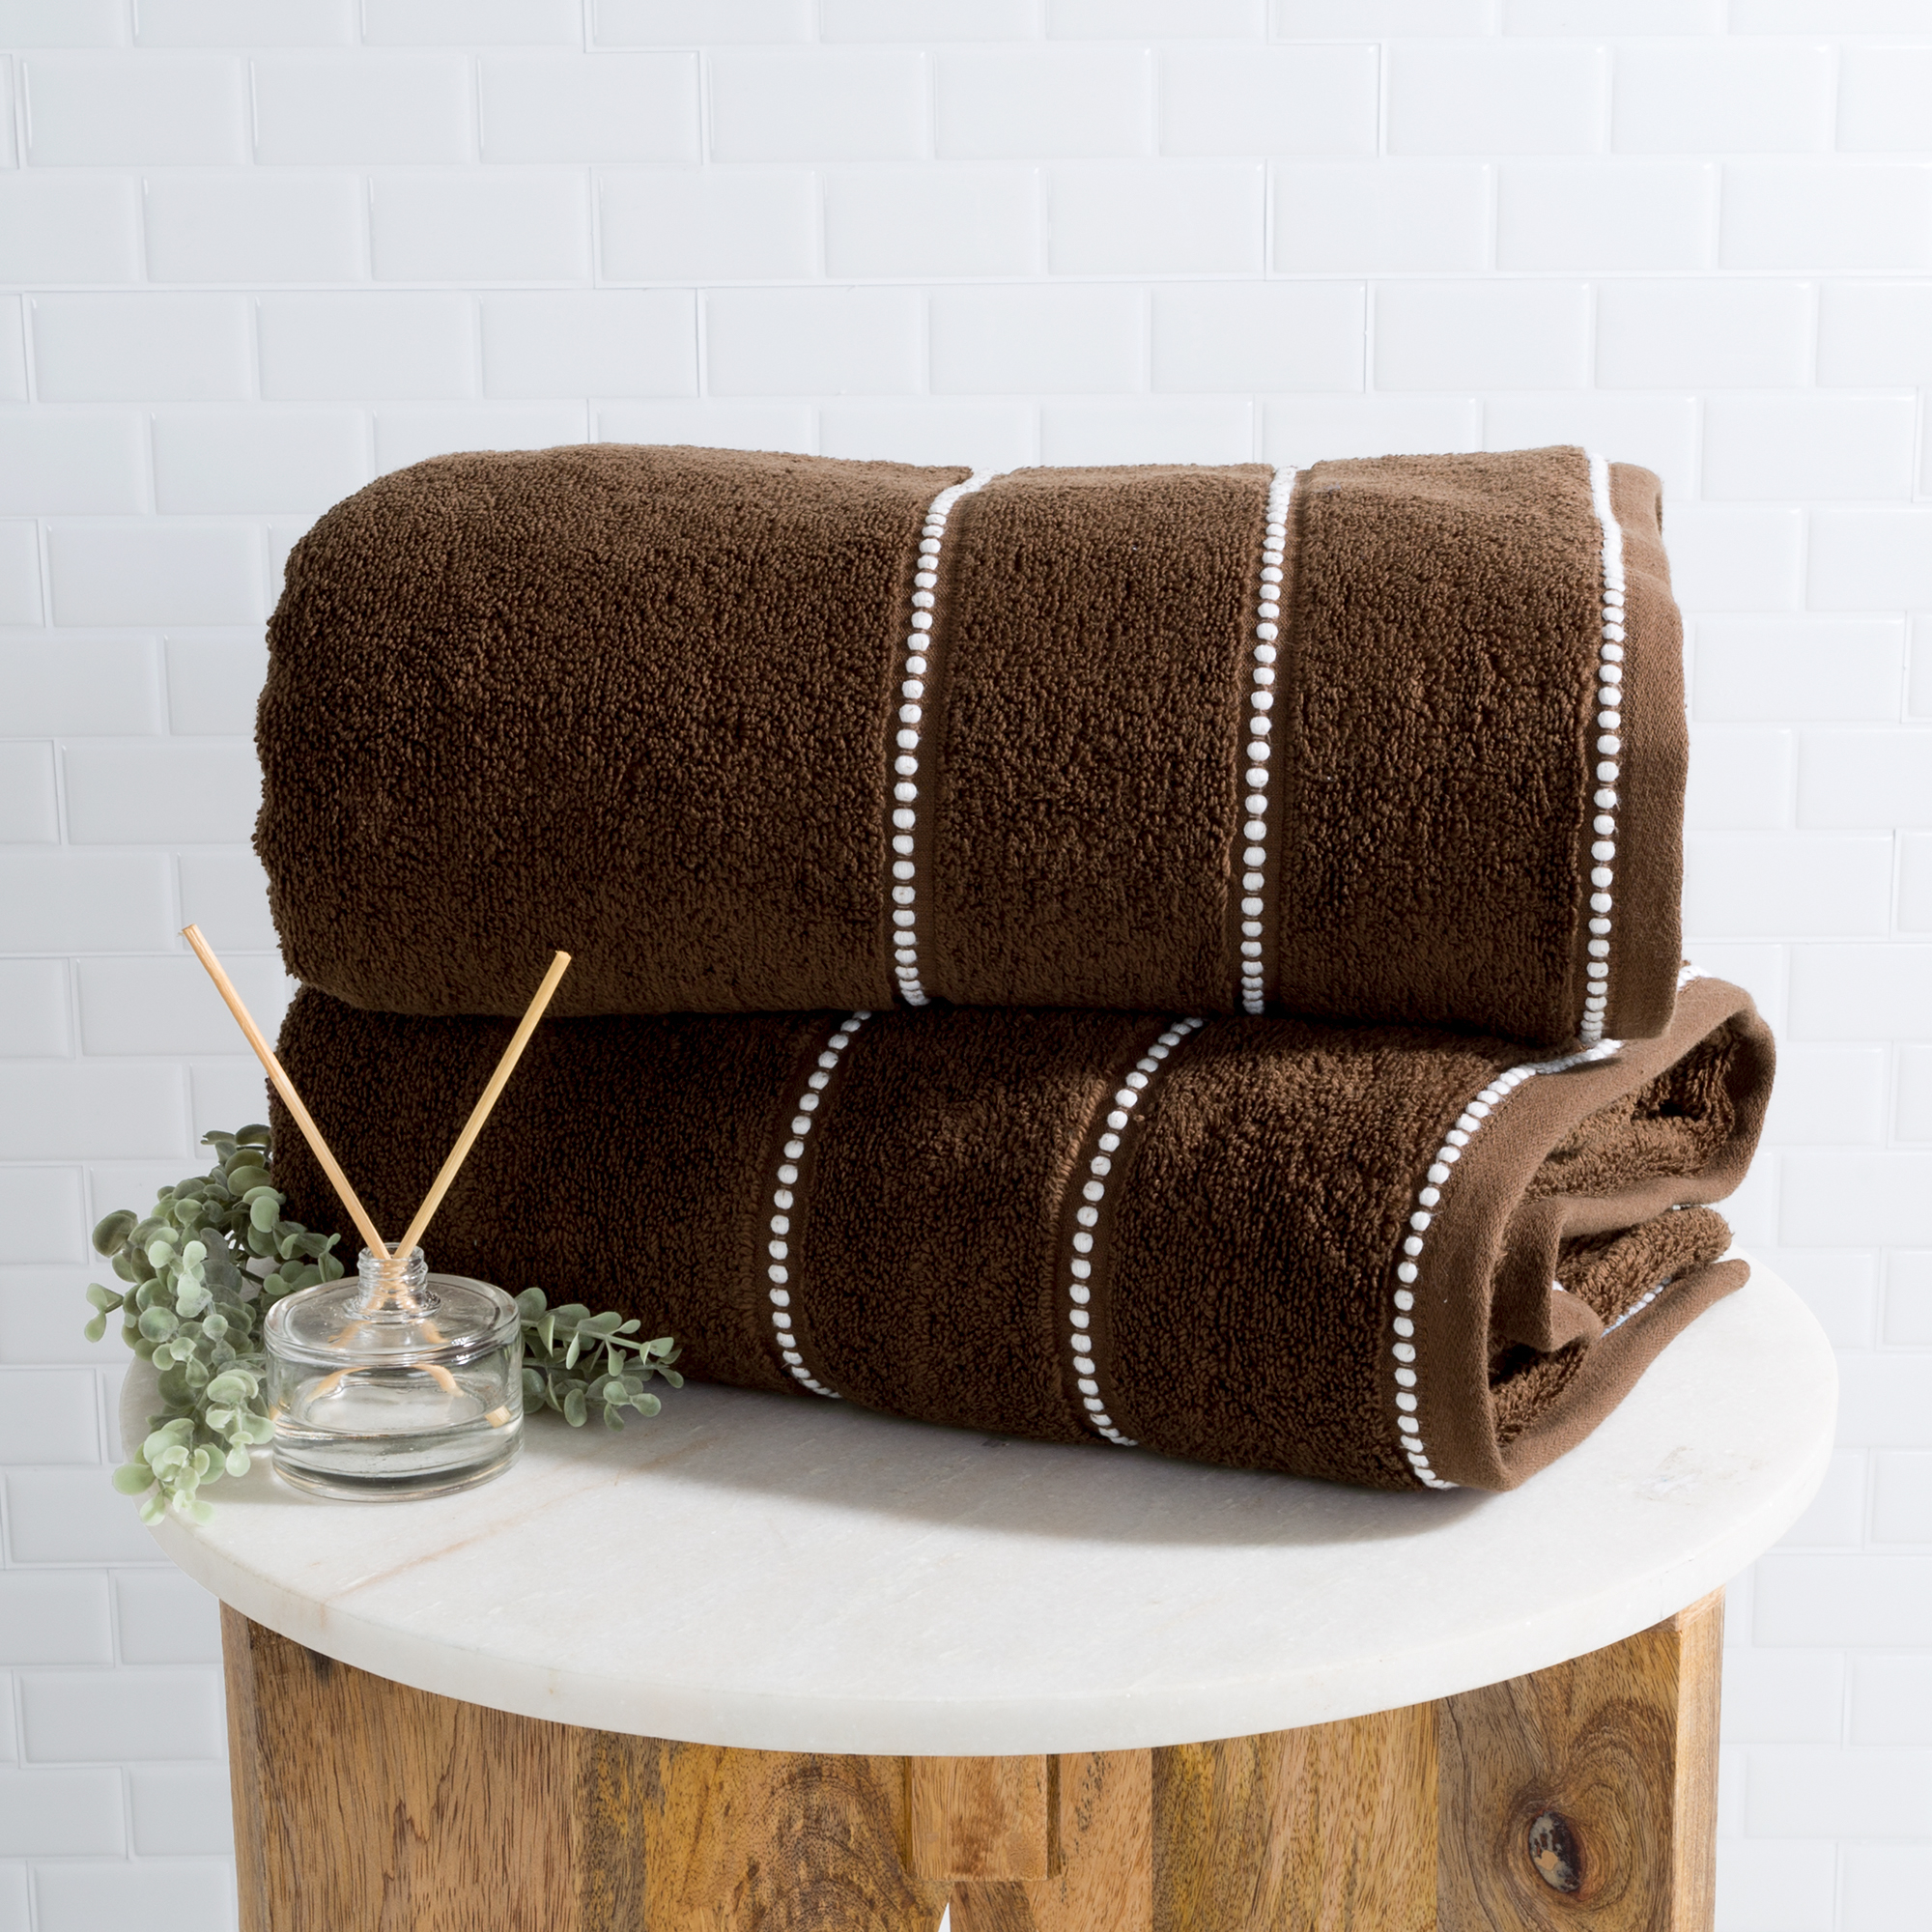 Luxurious Huge 34 X 68 In Cotton Towel Set- 2 Piece Bath Sheet Set Made From 100% Plush Cotton- Quick Dry, Soft And Absorbent Chocolate